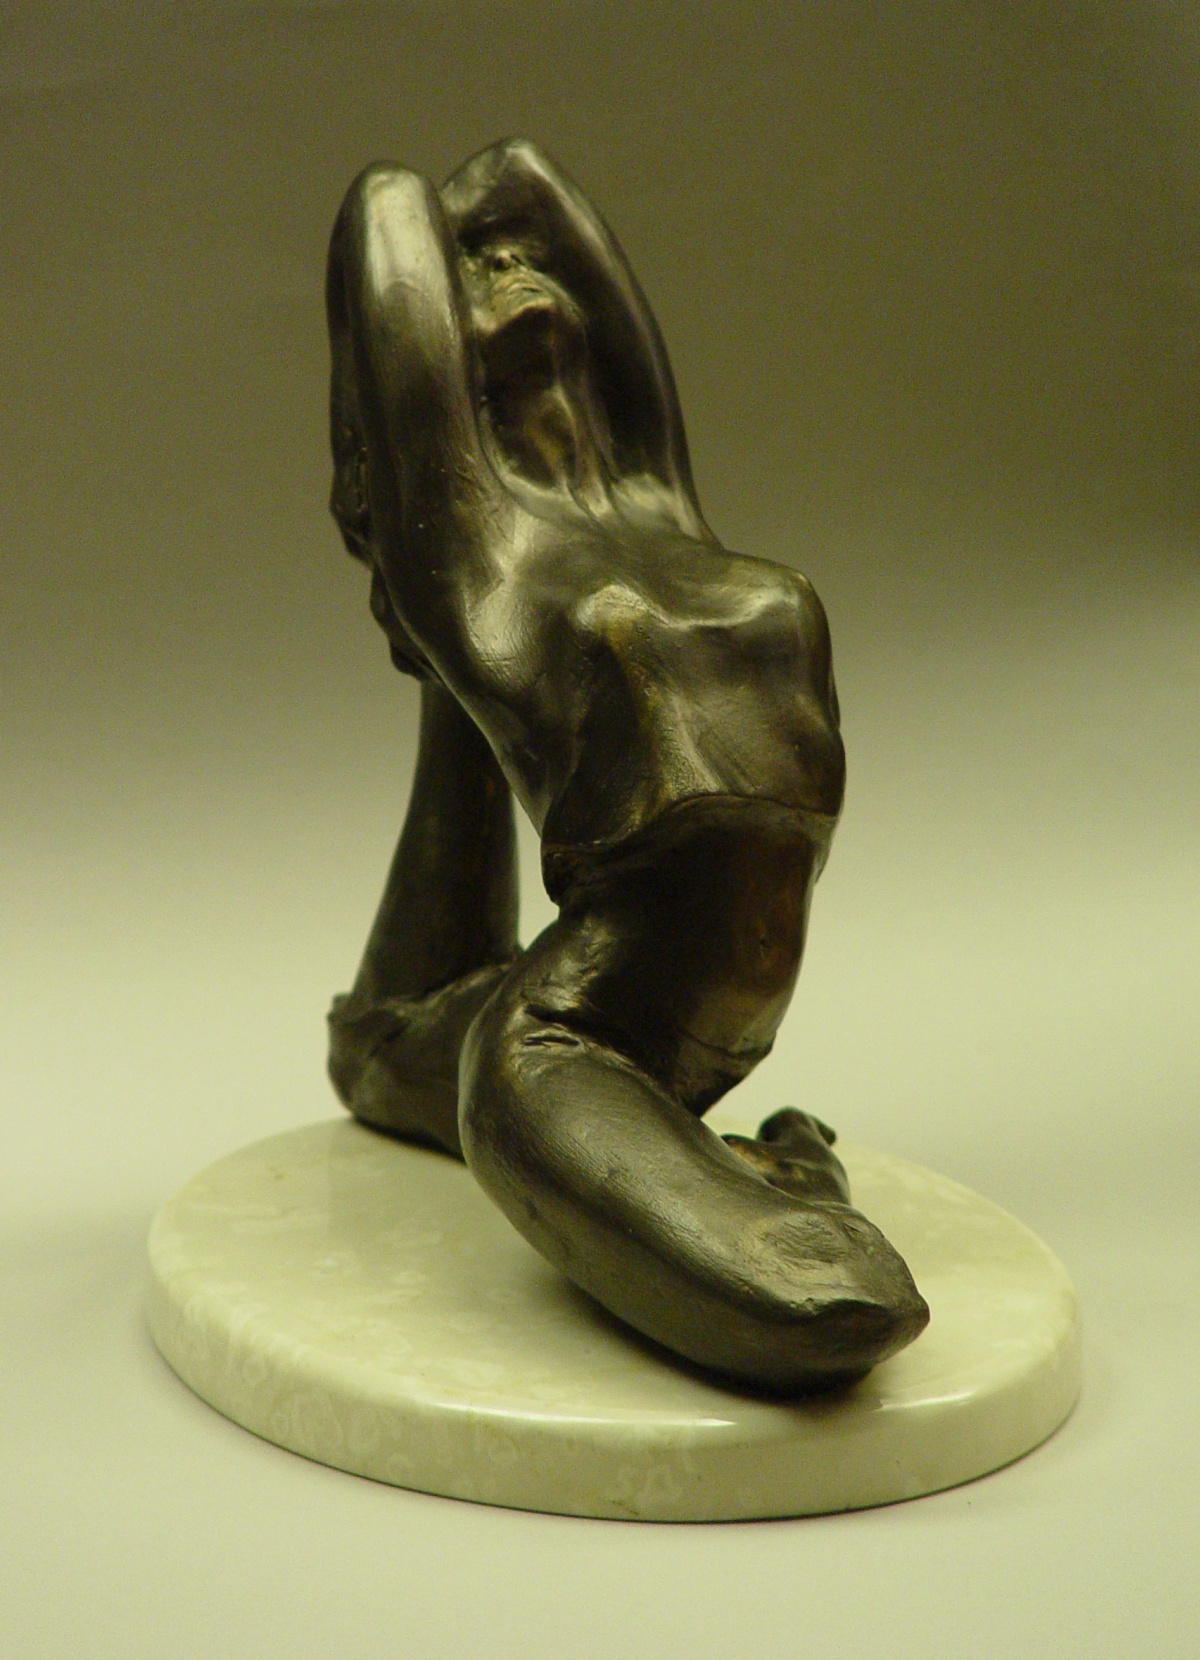 Pigeon Pose, bronze, 10 inches high